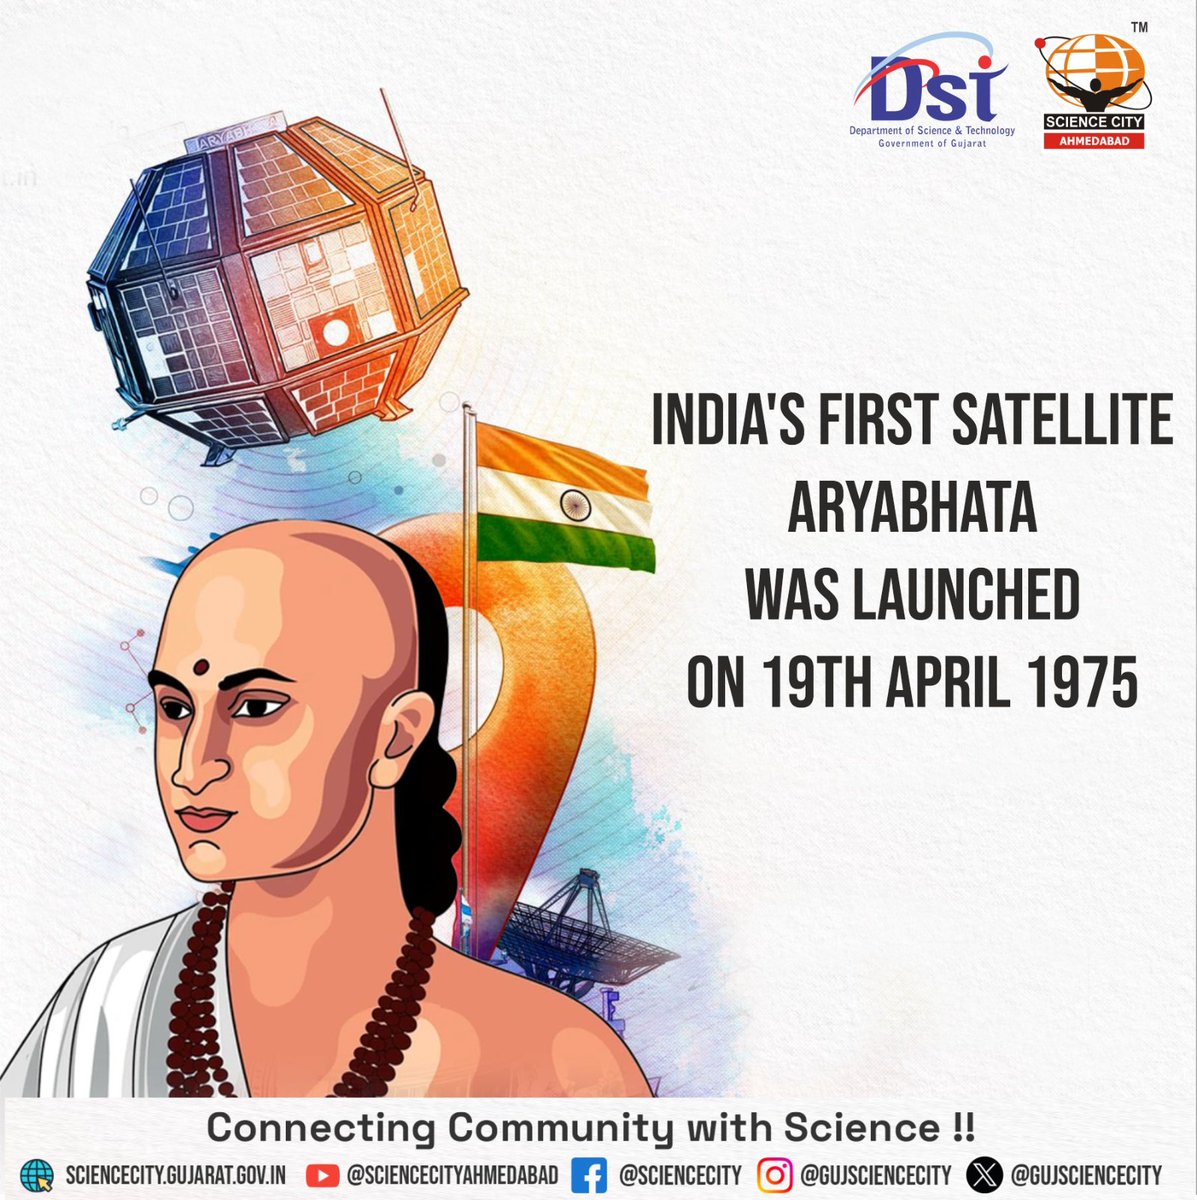 Aryabhata, the satellite bearing the name of the visionary mathematician of ancient India, epitomizes humanity's boundless curiosity and tireless exploration of the cosmos. It was launched on 19 April in the year 1975. #Aryabhata #chalosciencecity @indiadst @dstgujarat @jbvadar